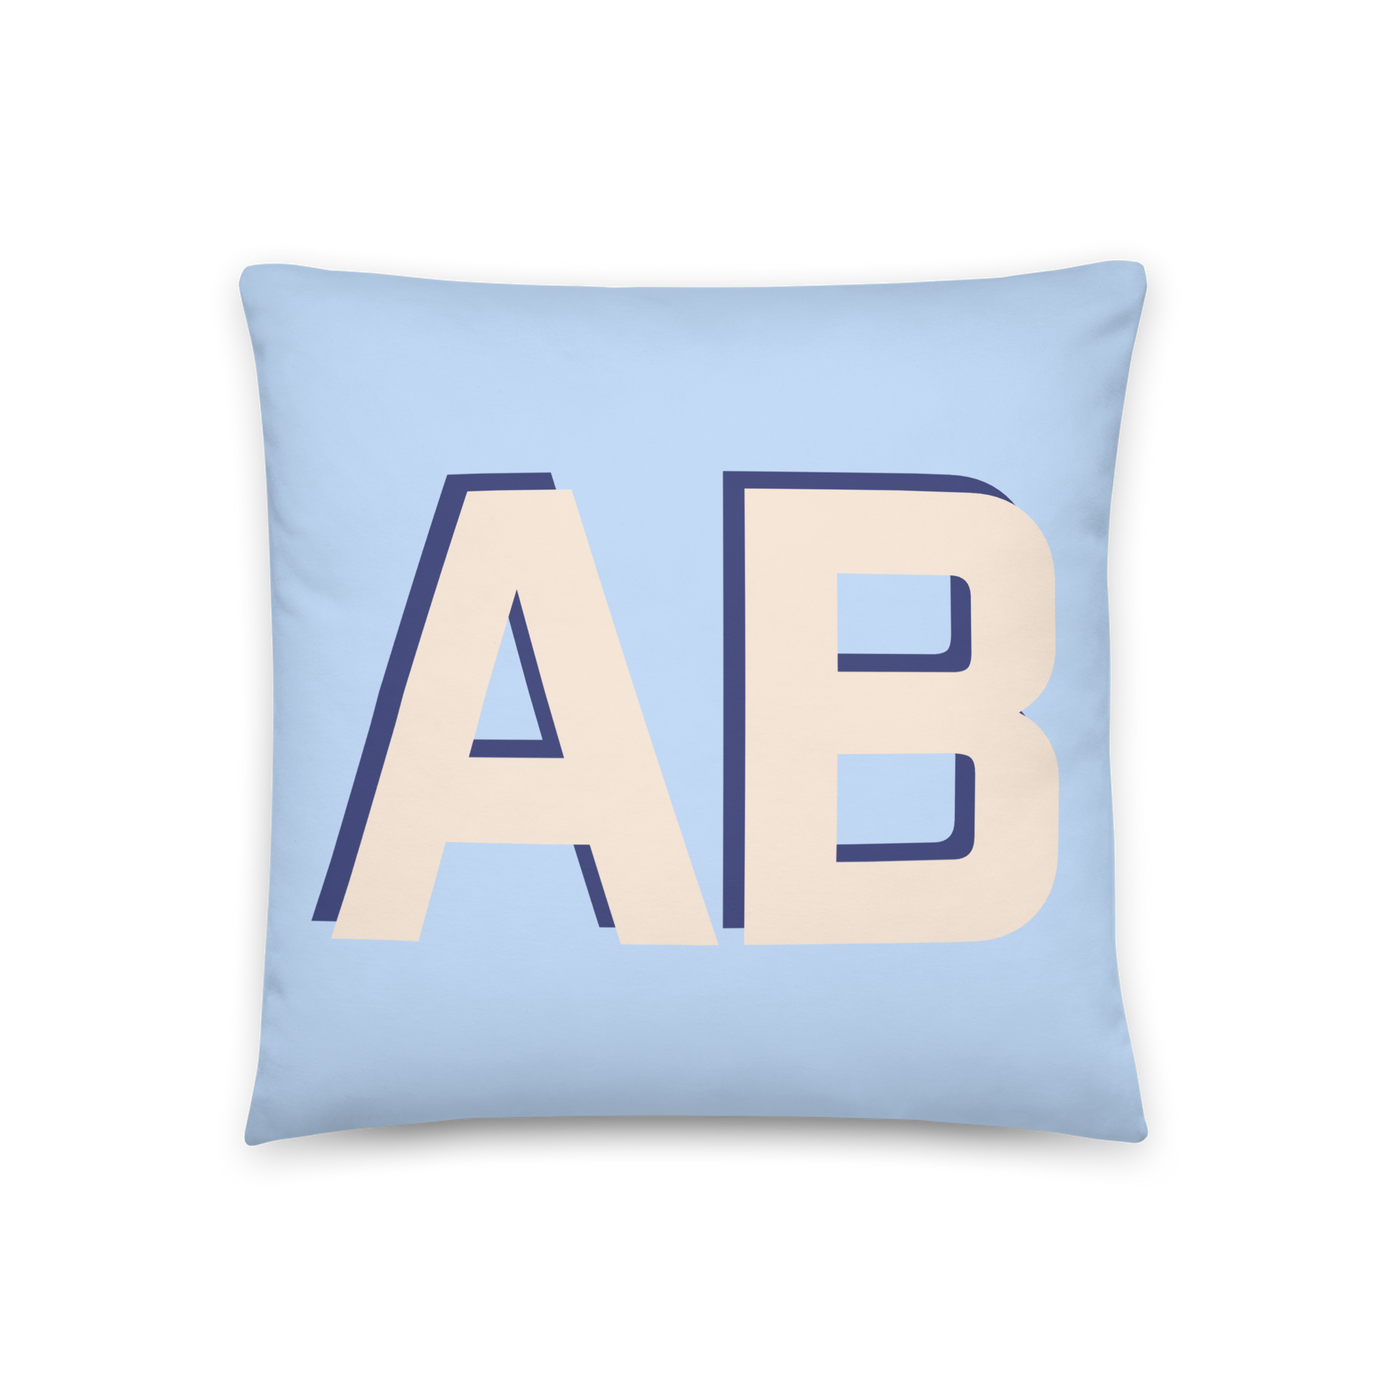 Initialed Shadow Block Pillow Case + Pillow